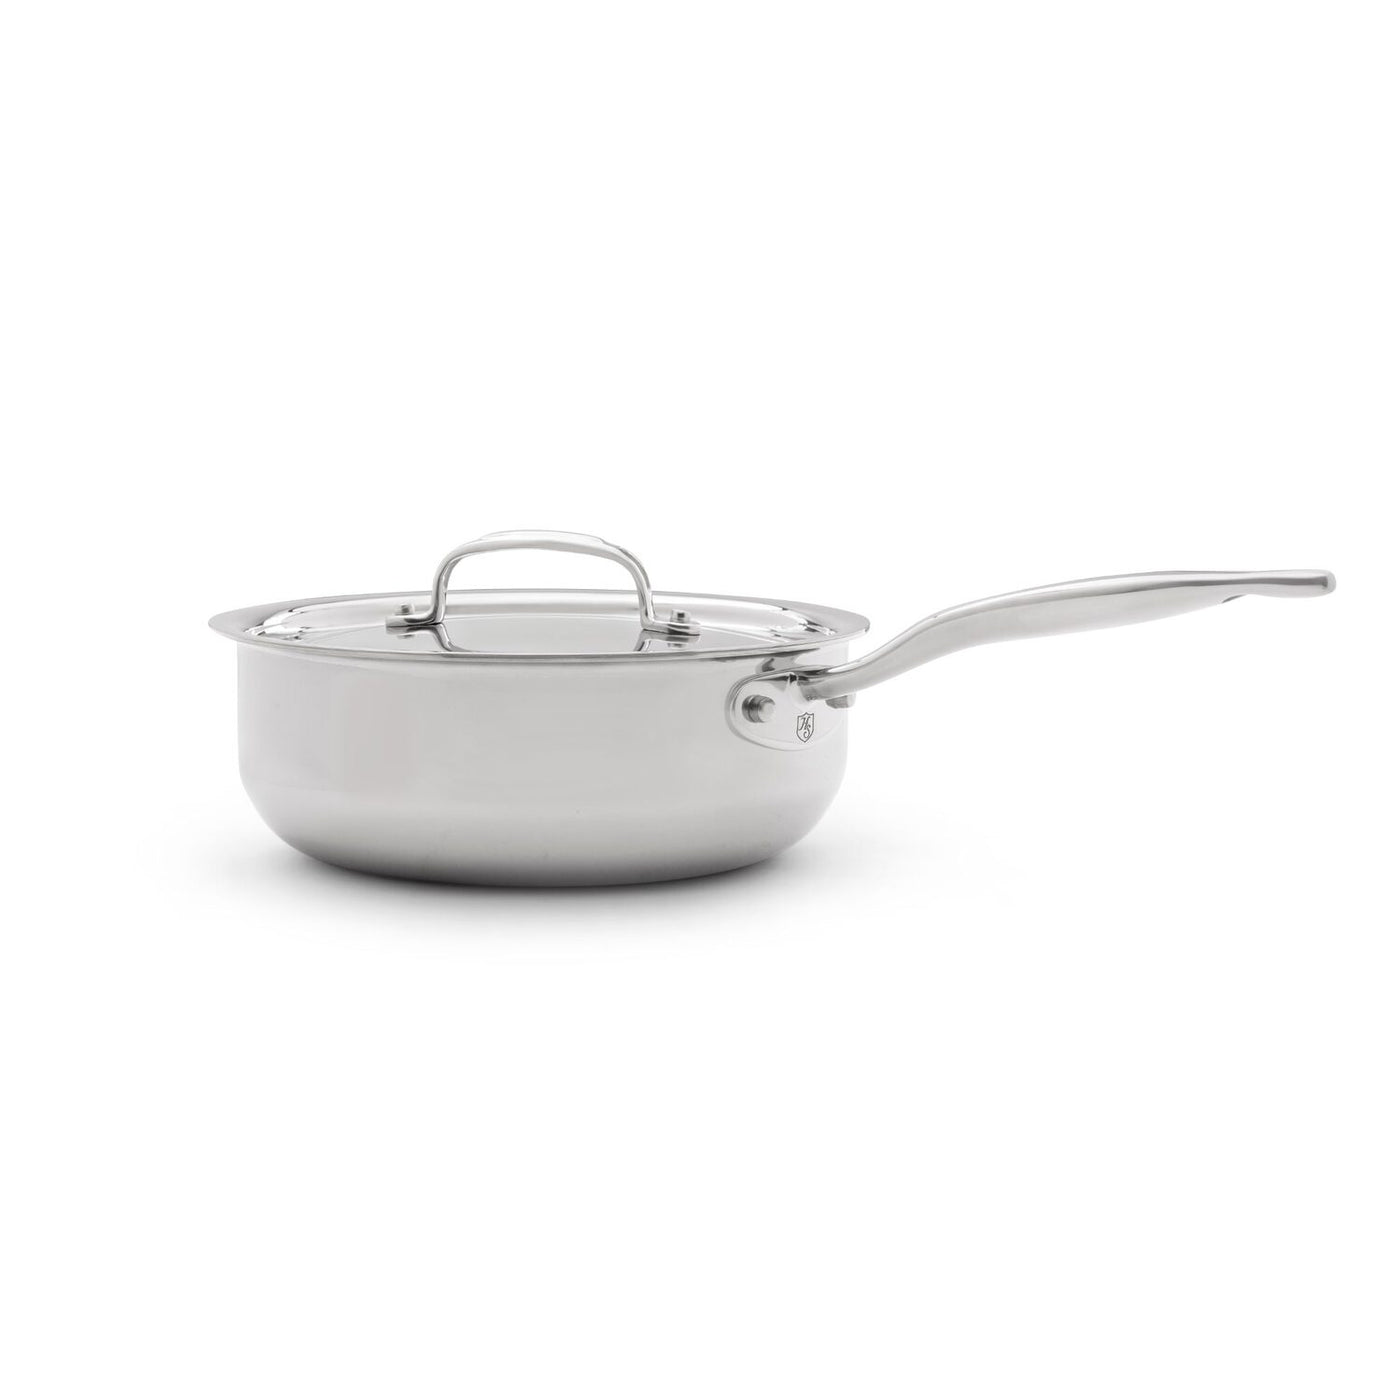 All-Clad 4303 Tri-ply Stainless Steel 3-qt Casserole with Steamer